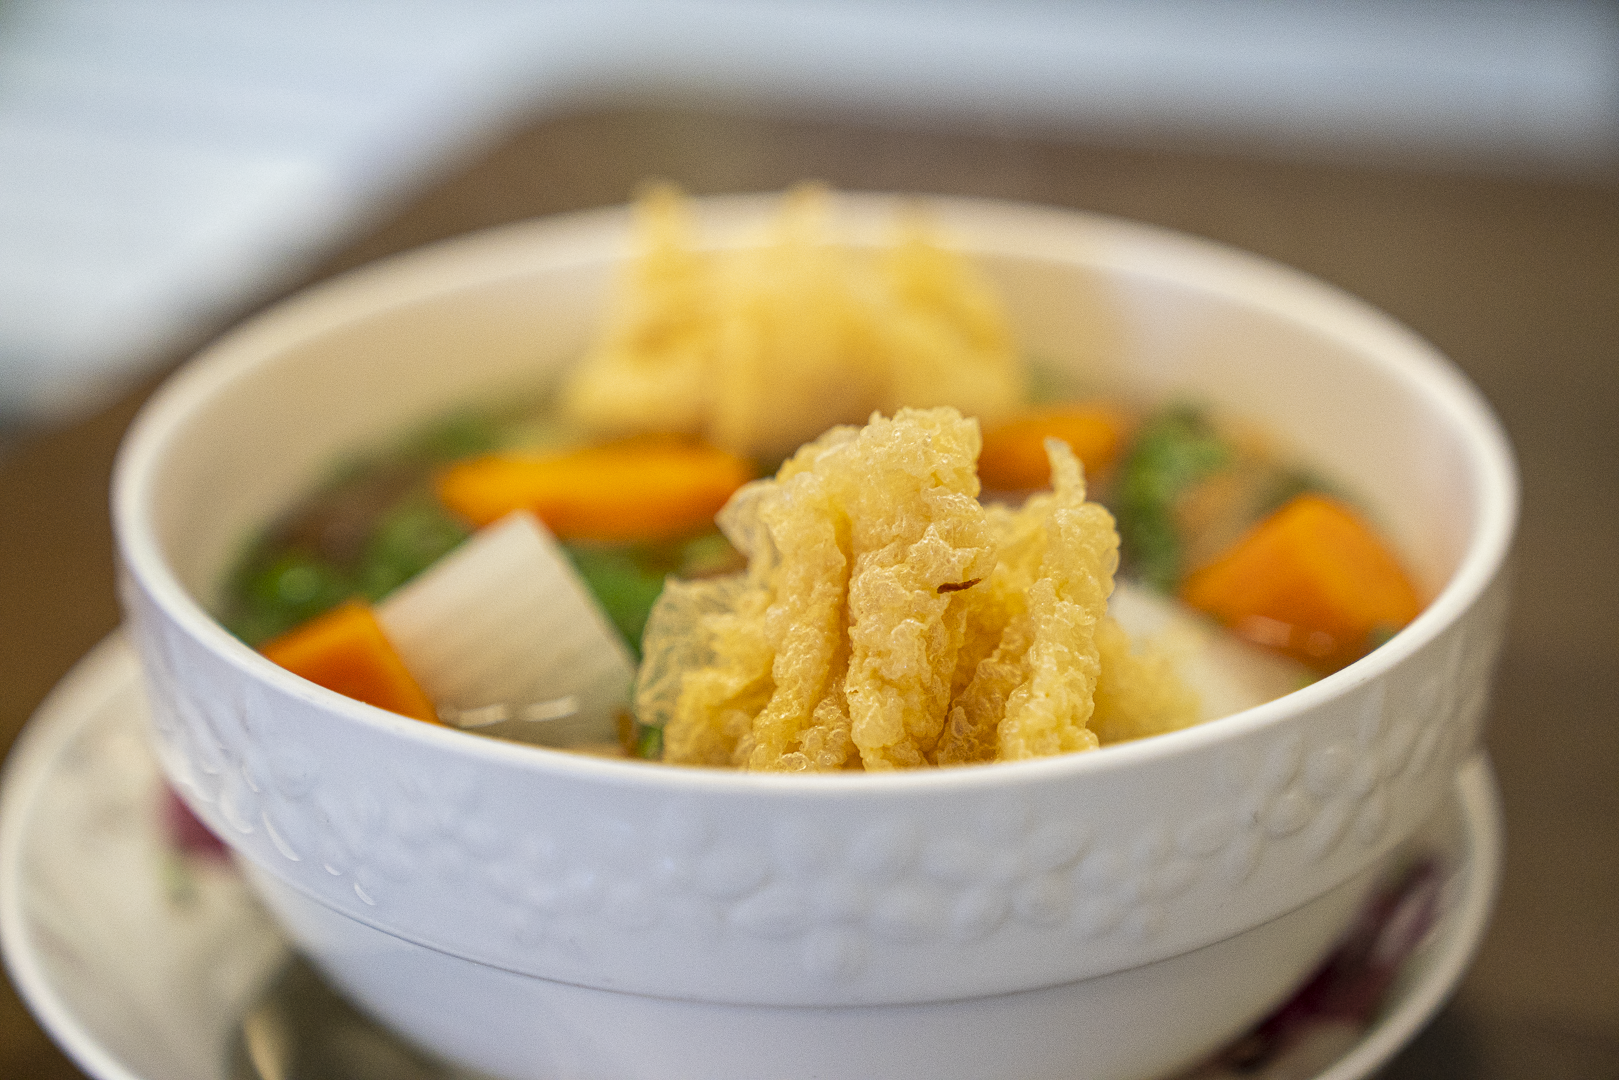 Bánh canh chay (Vegetable thick noodle soup)